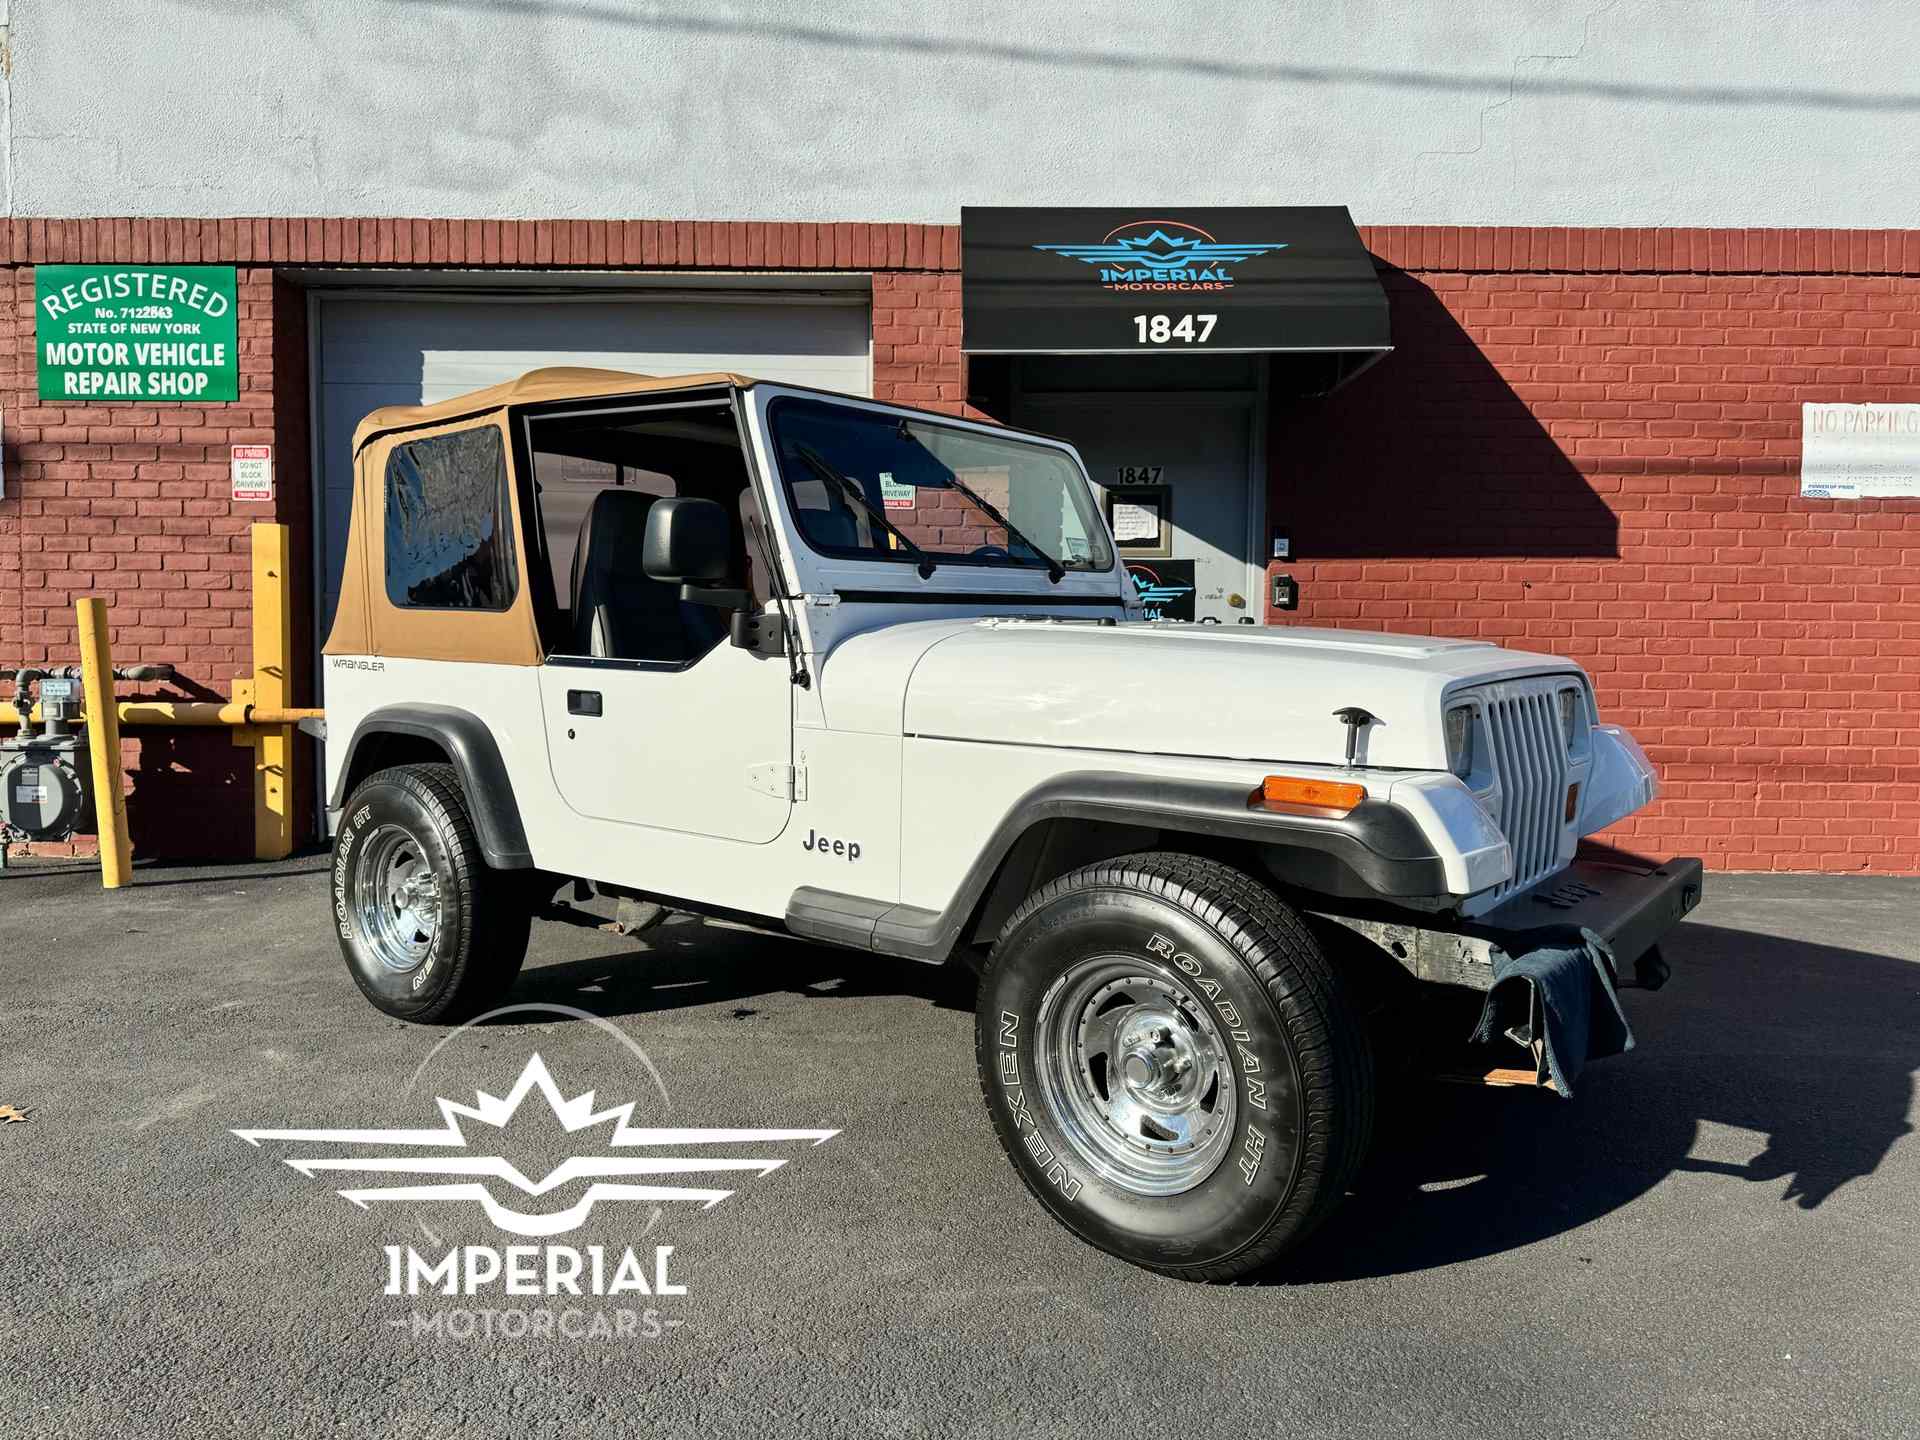 1995-jeep-wrangler-2dr-s-for-sale-01